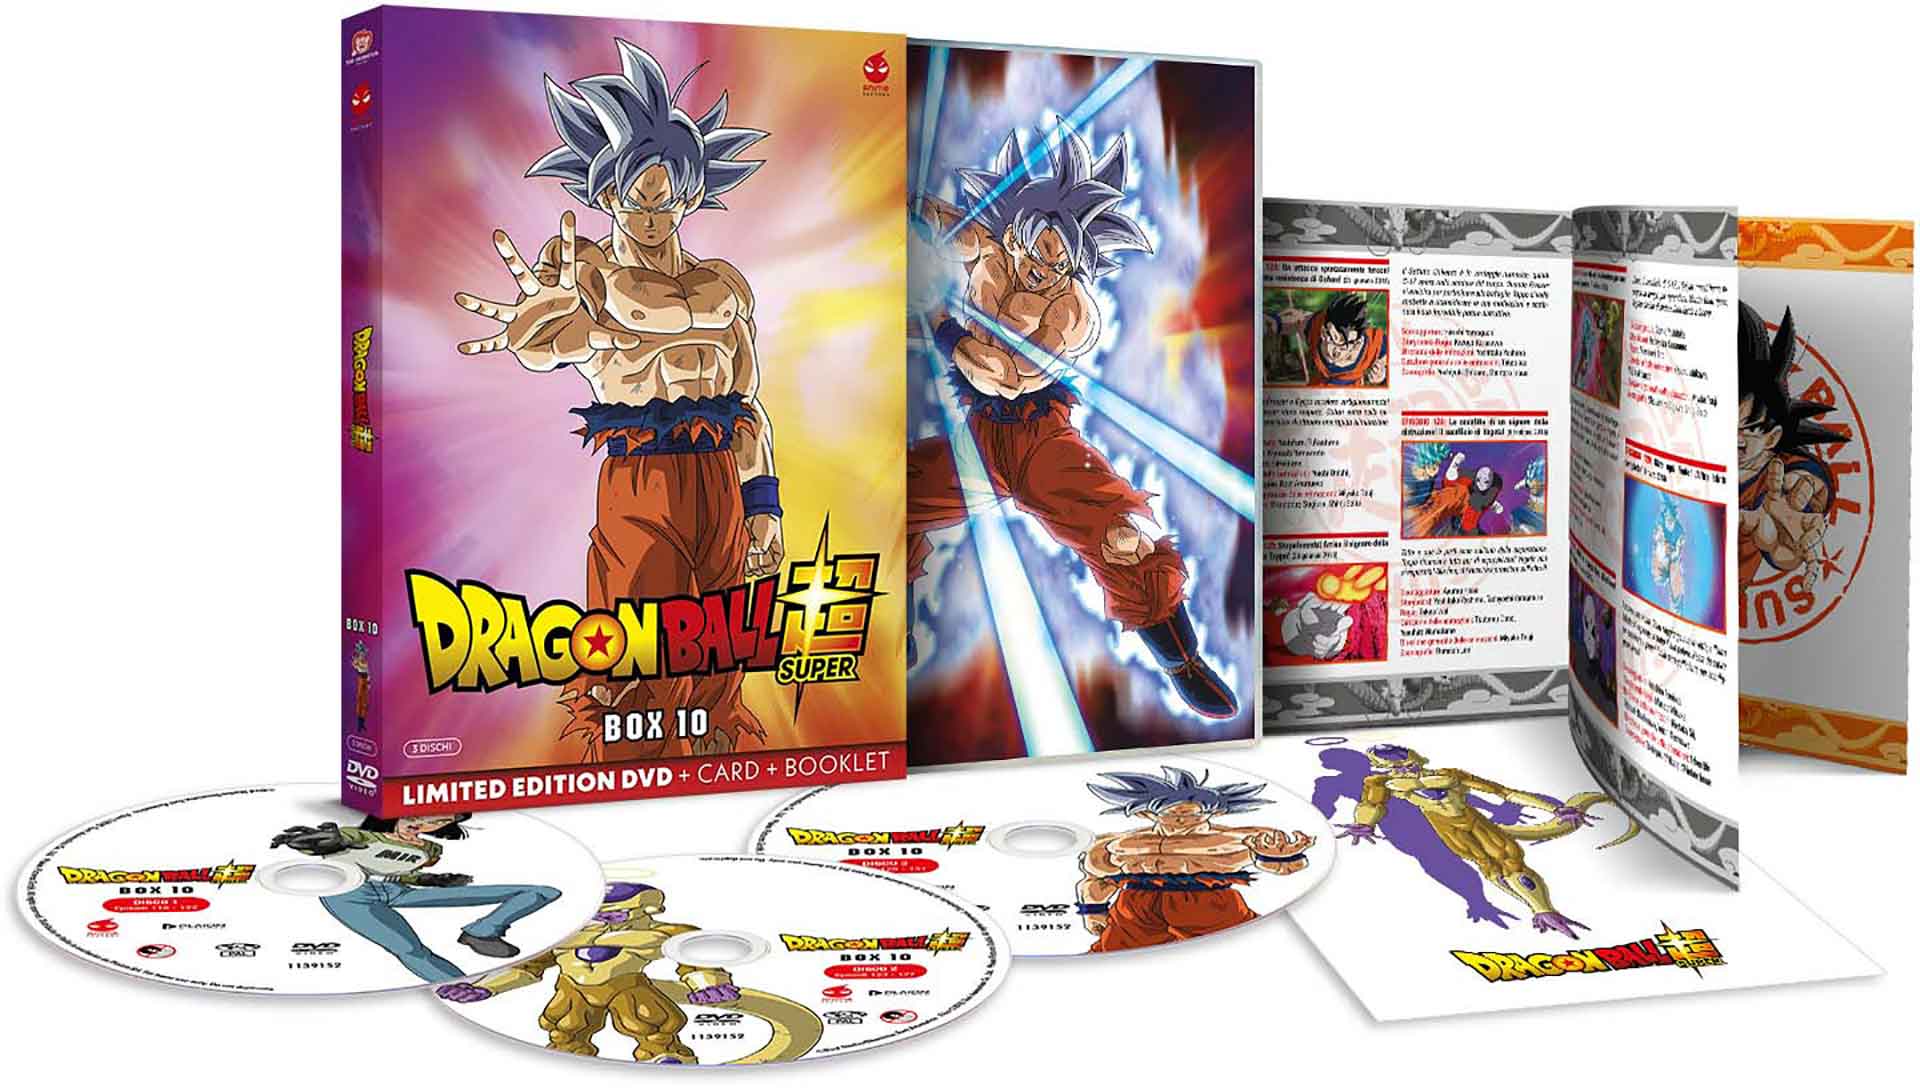 Dragon Ball Super - Volume 10 - Limited Edition Anime Factory 3 DVD + Card + Booklet (DVD) Image 2